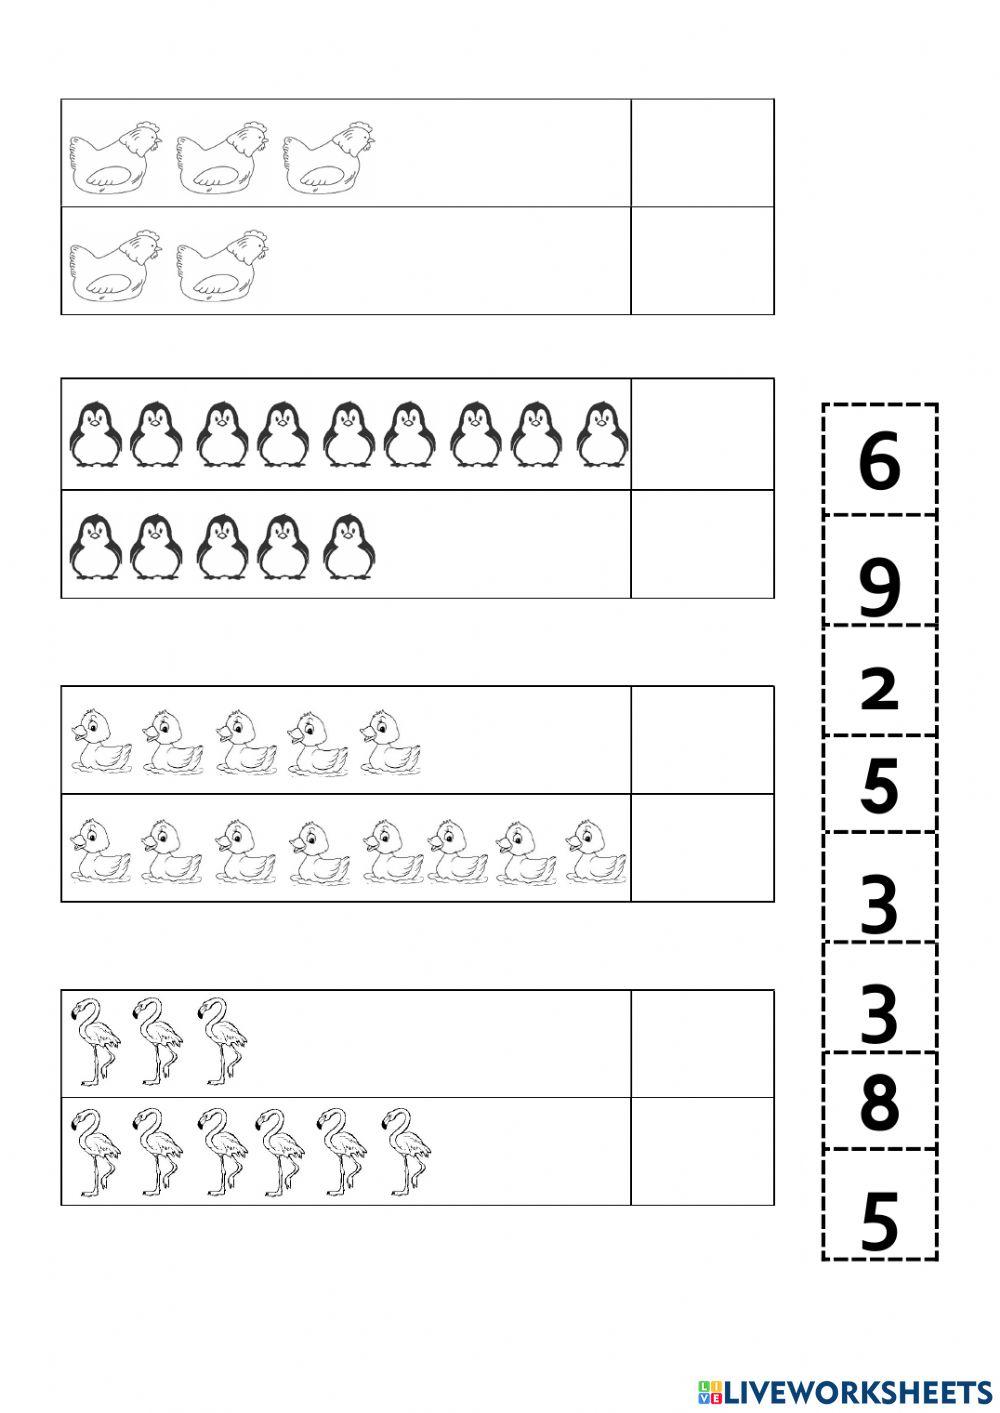 Object Counting 2